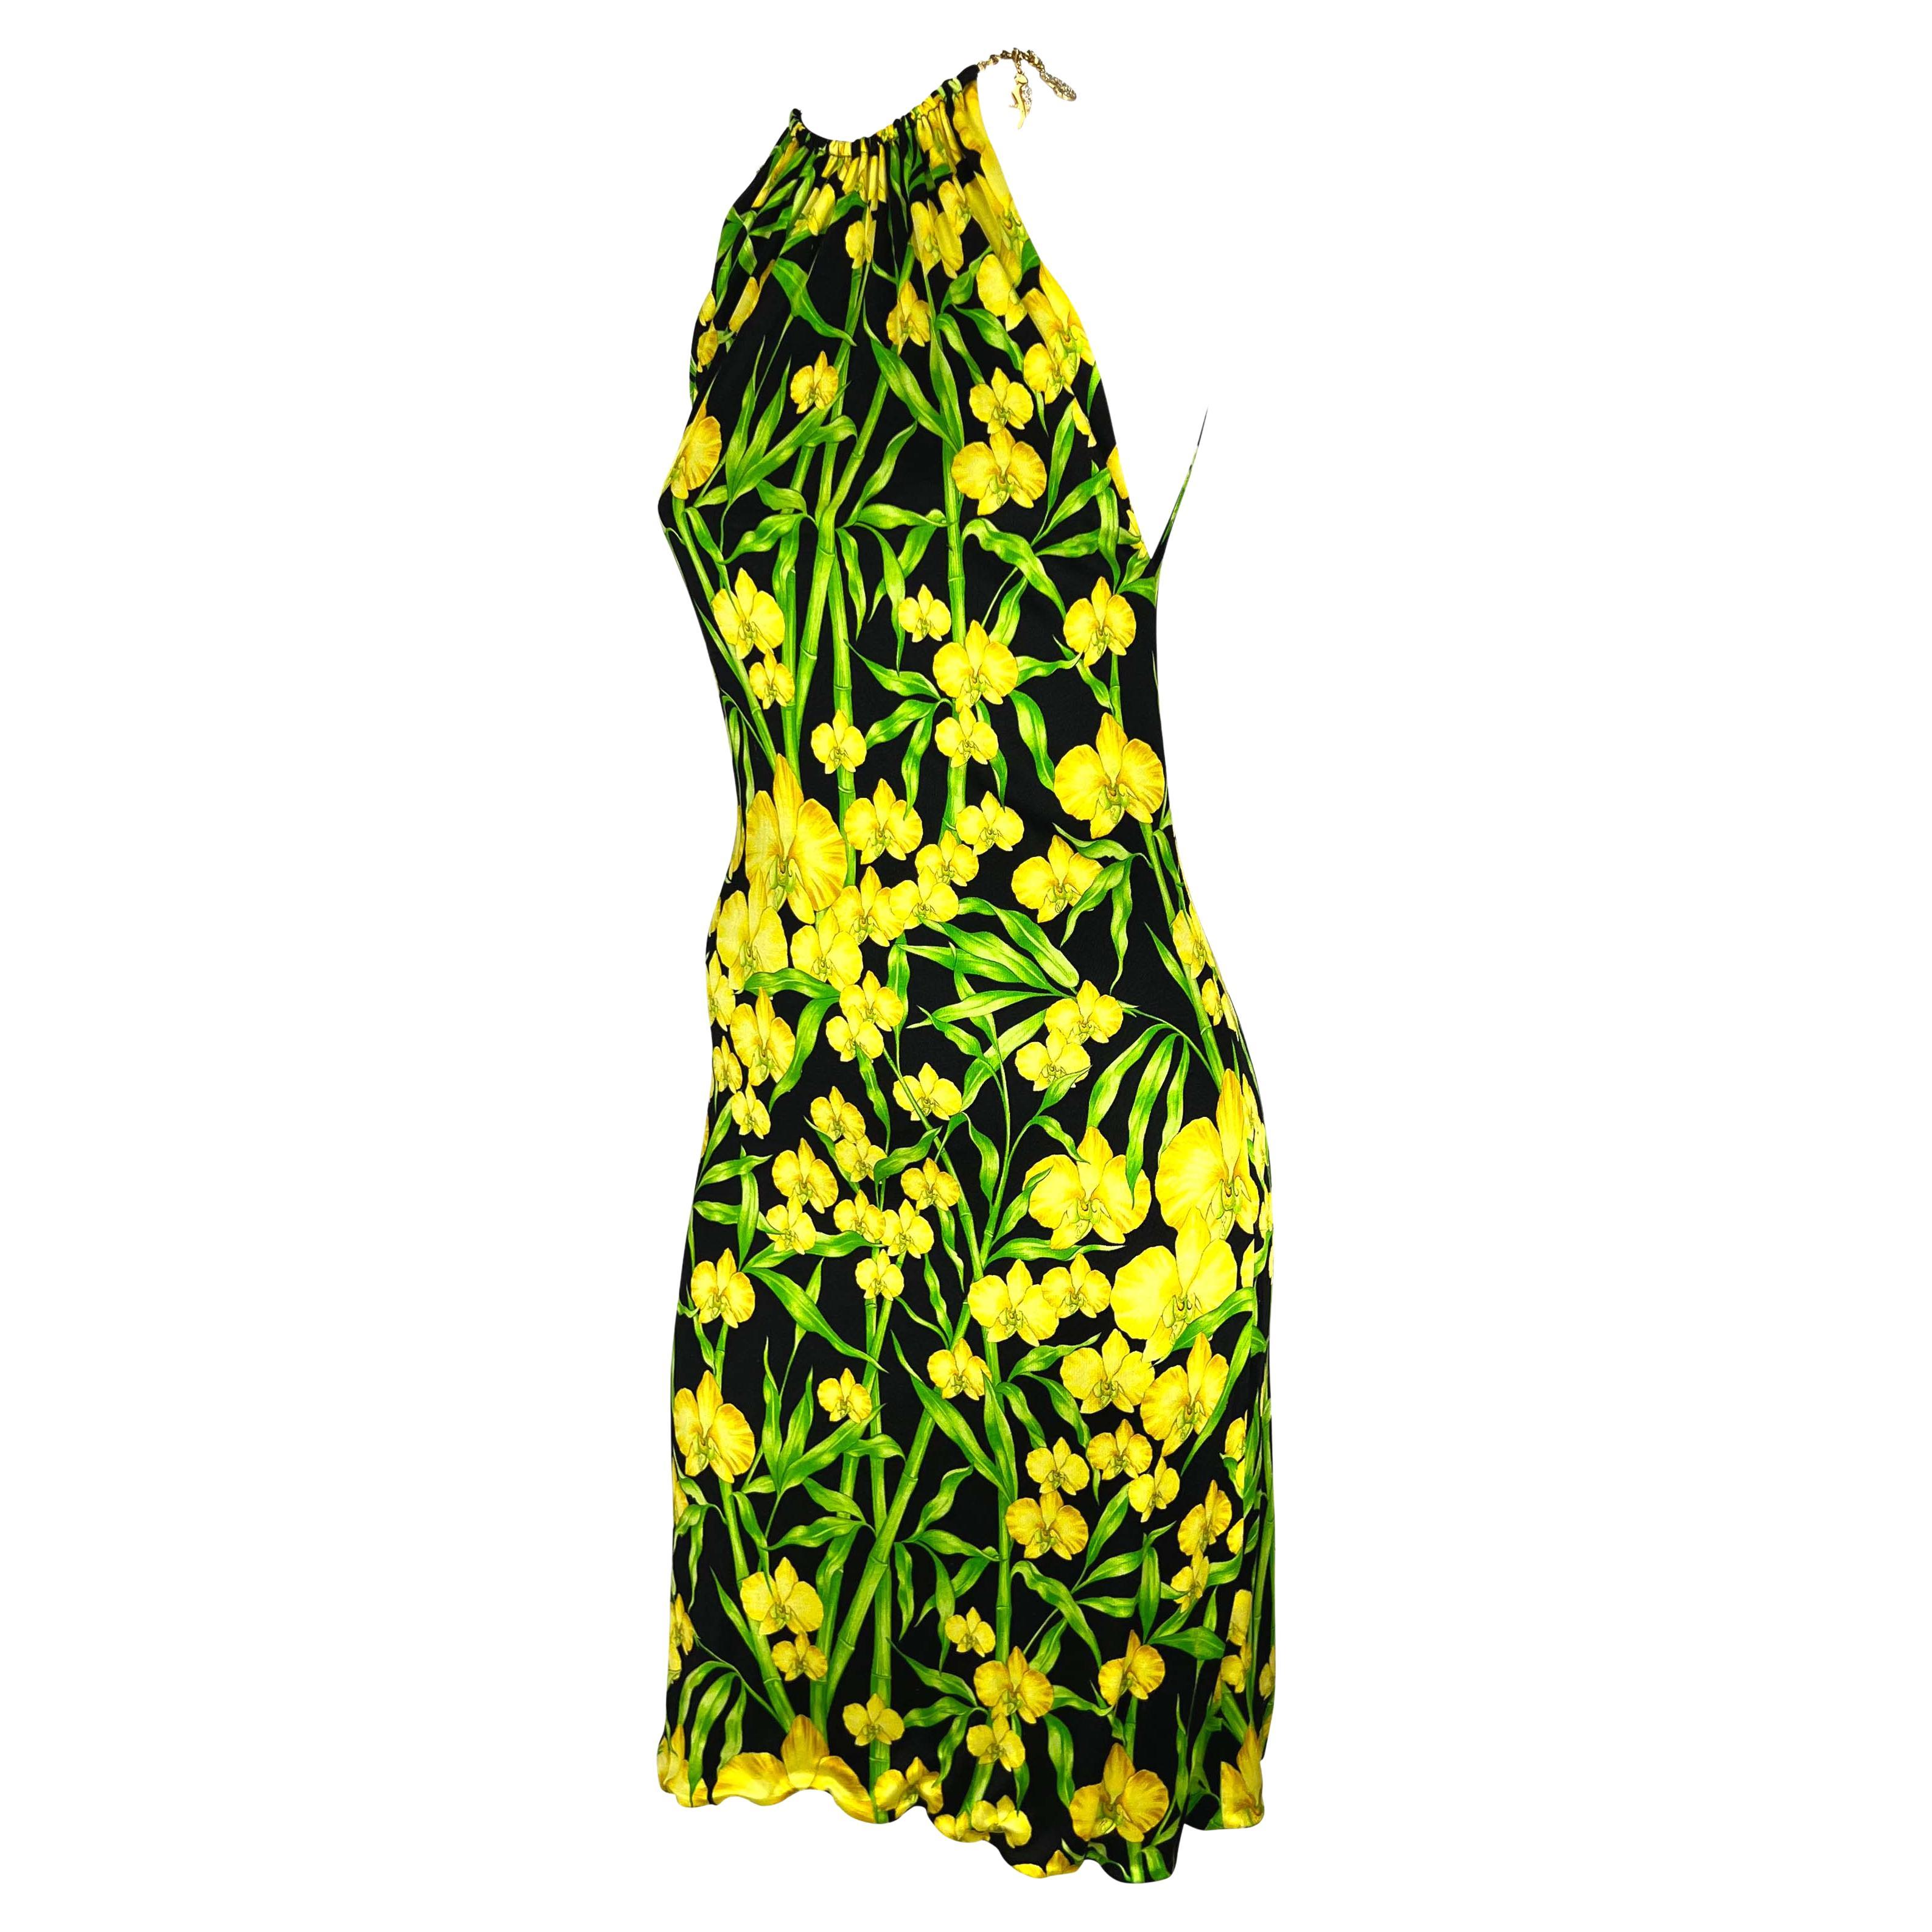 S/S 2000 Gianni Versace by Donatella Jungle Yellow Orchid Stretch Charm Dress For Sale